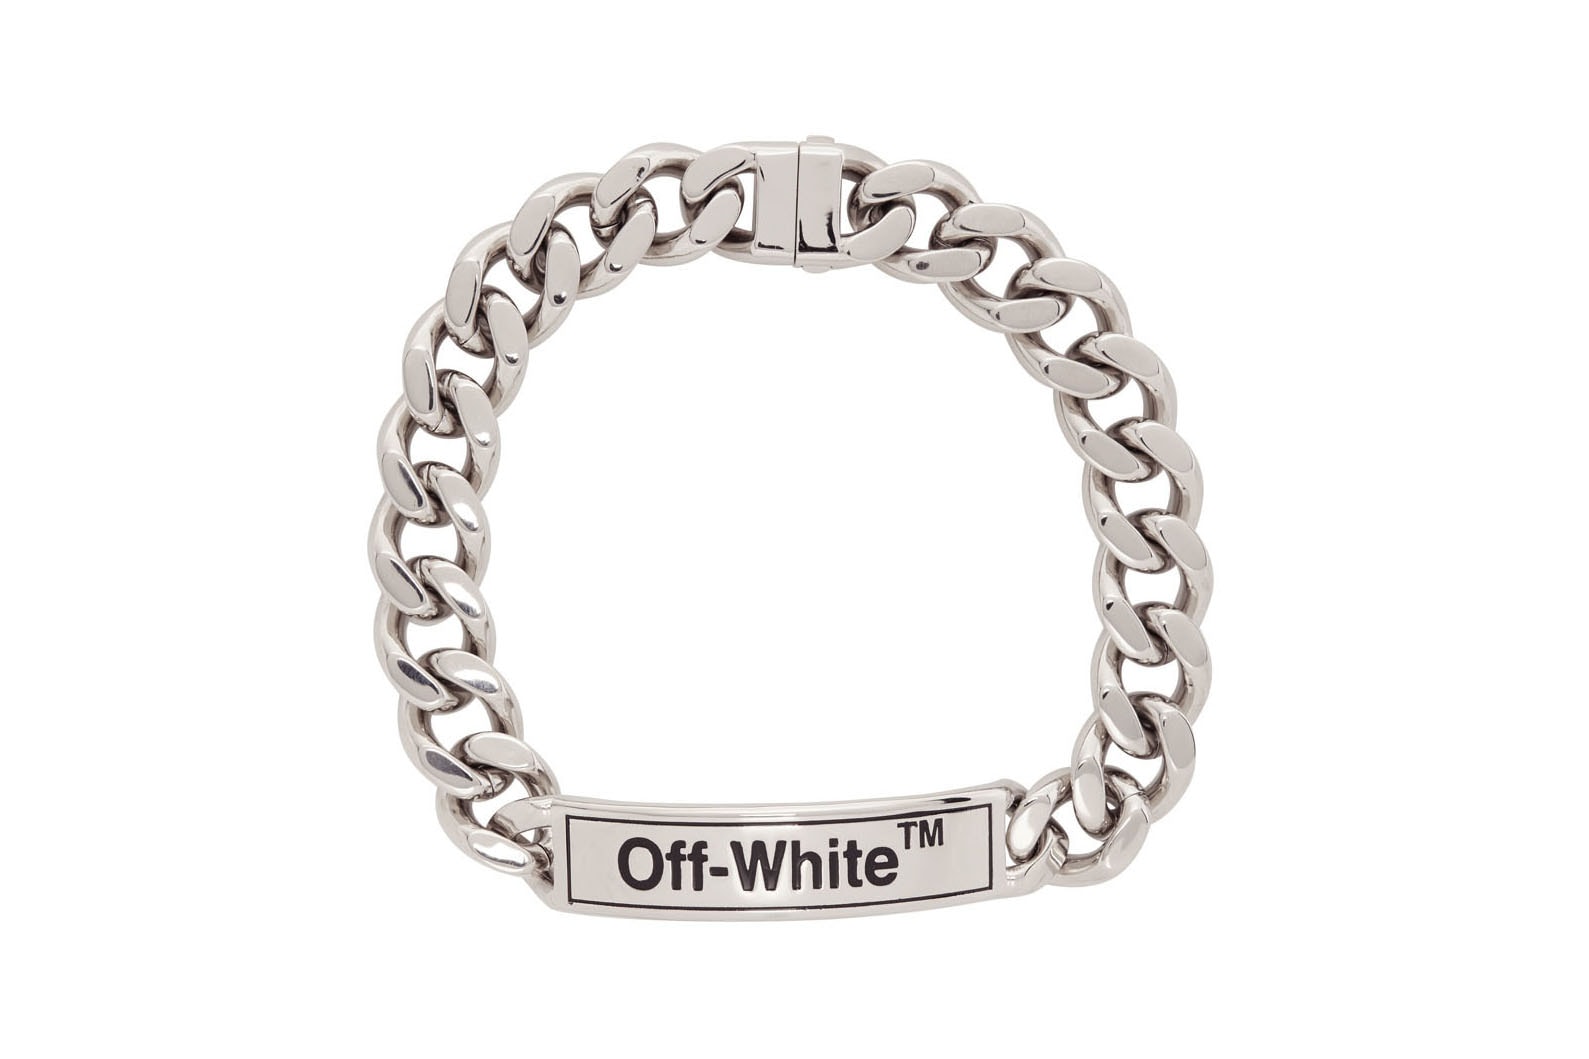 off-white jewelry chain silver necklace